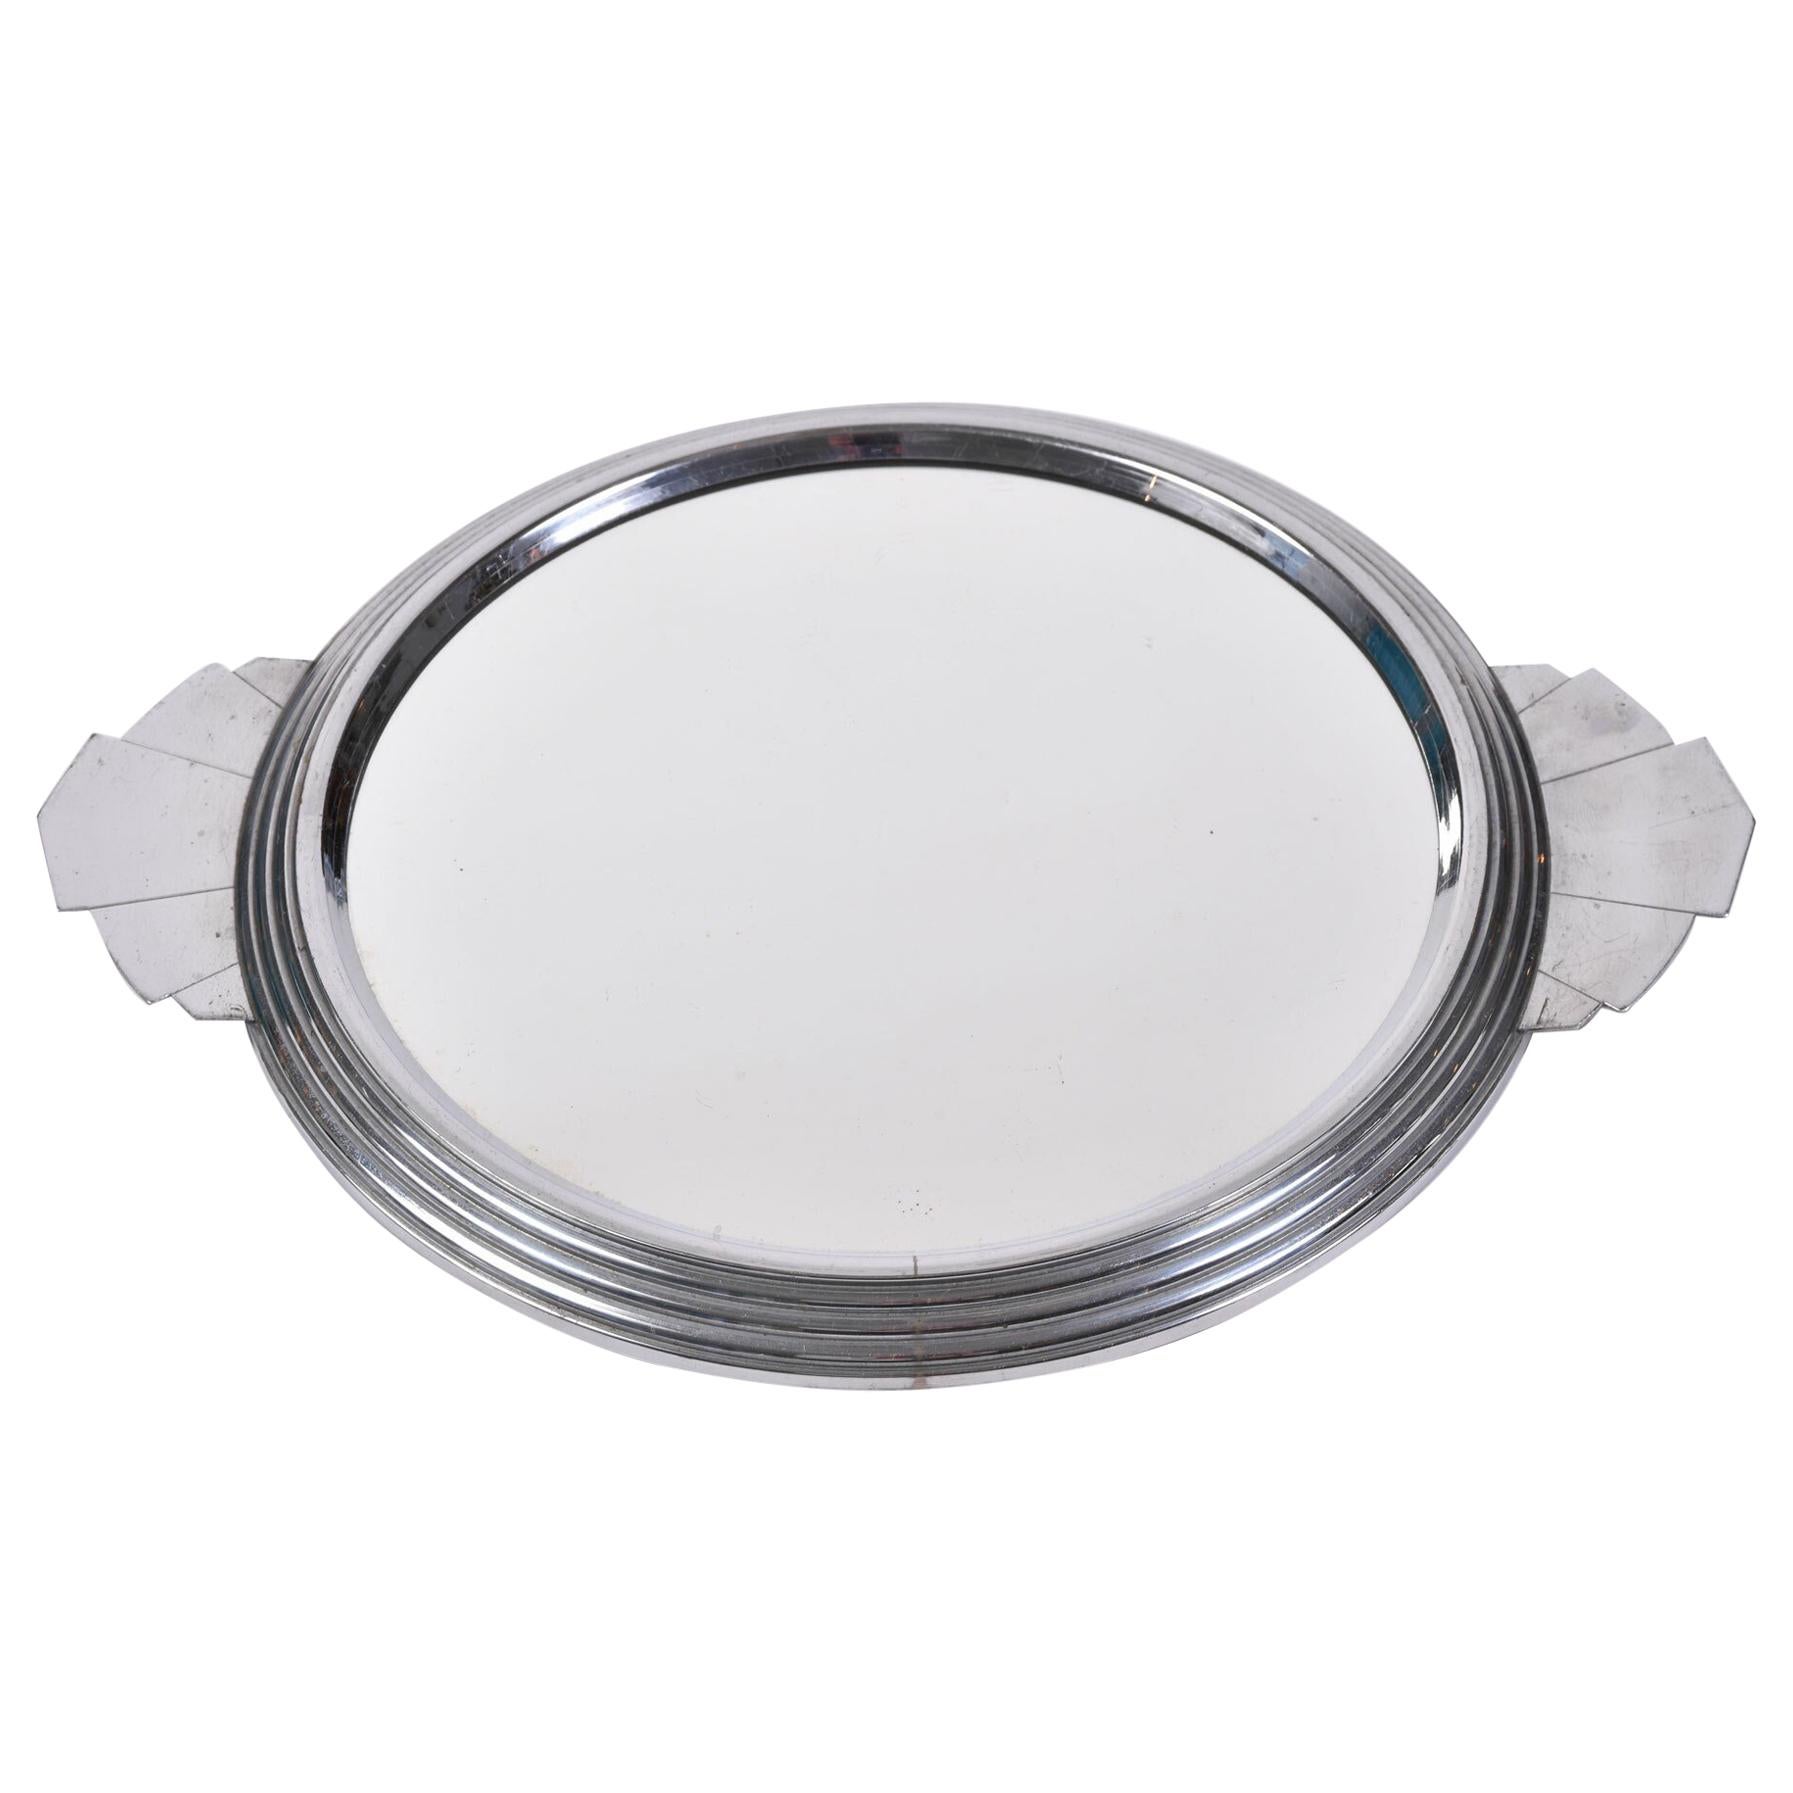 French 1930s Art Deco circular Mirrored Tray